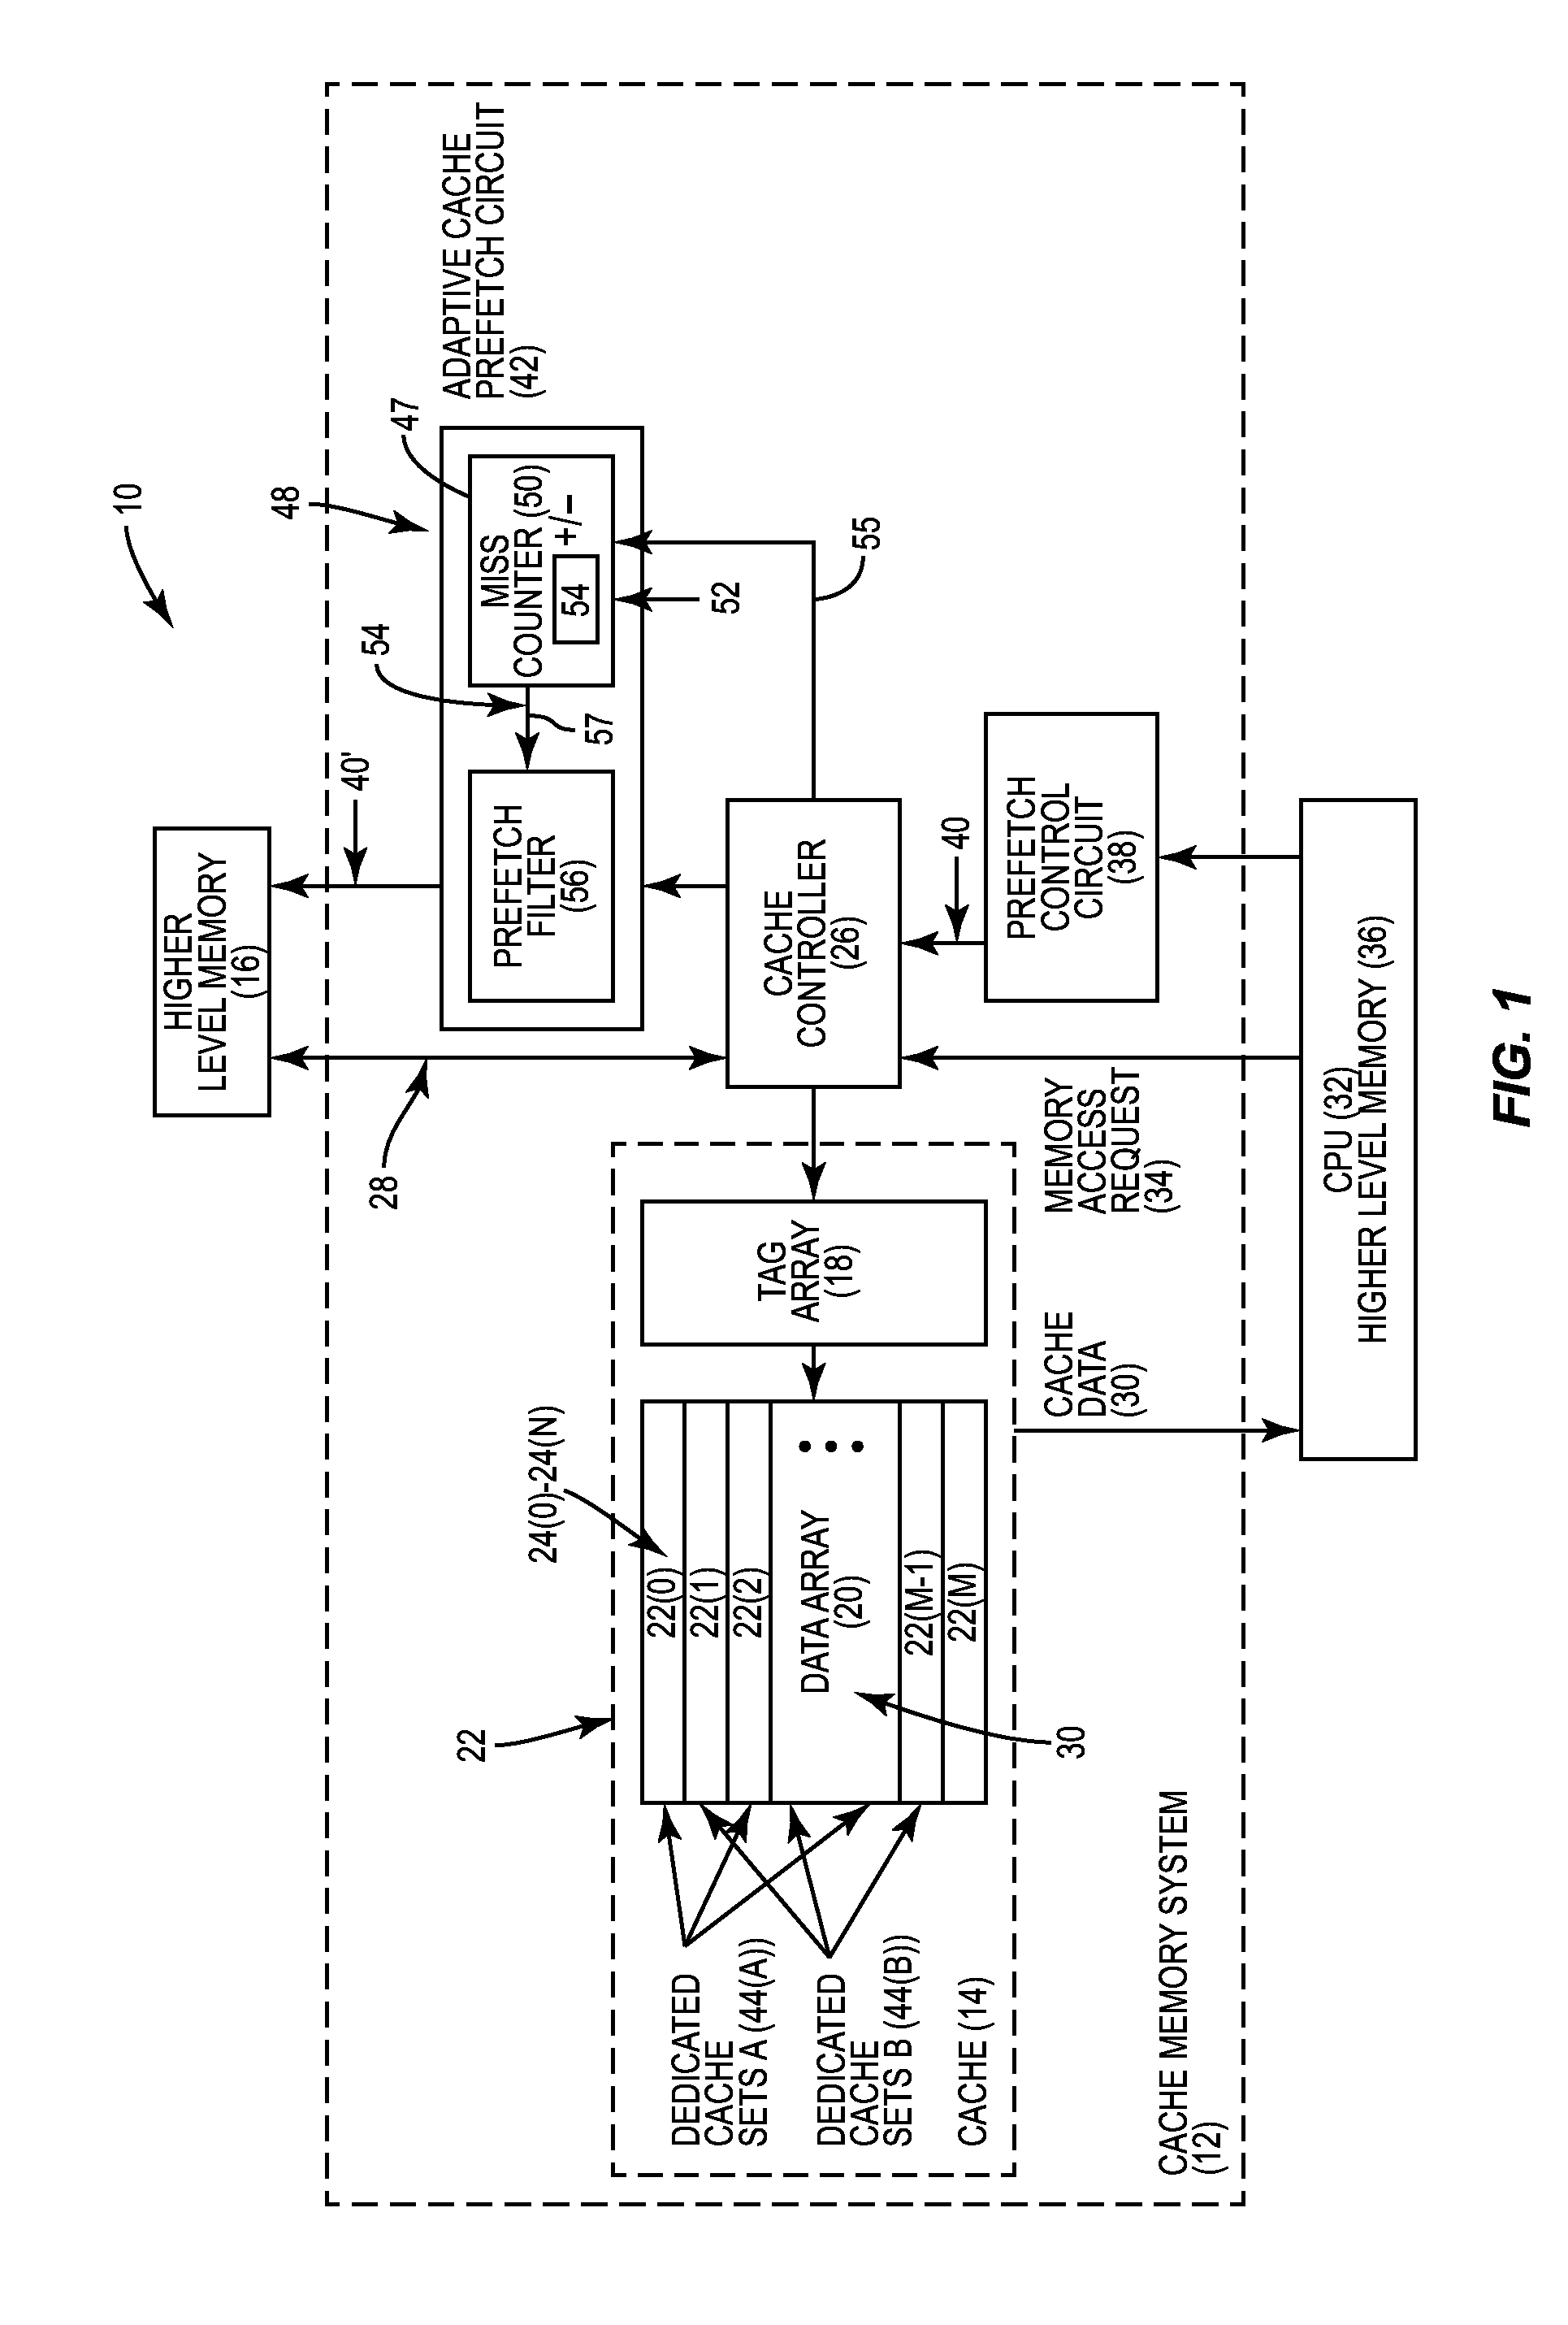 Adaptive cache prefetching based on competing dedicated prefetch policies in dedicated cache sets to reduce cache pollution